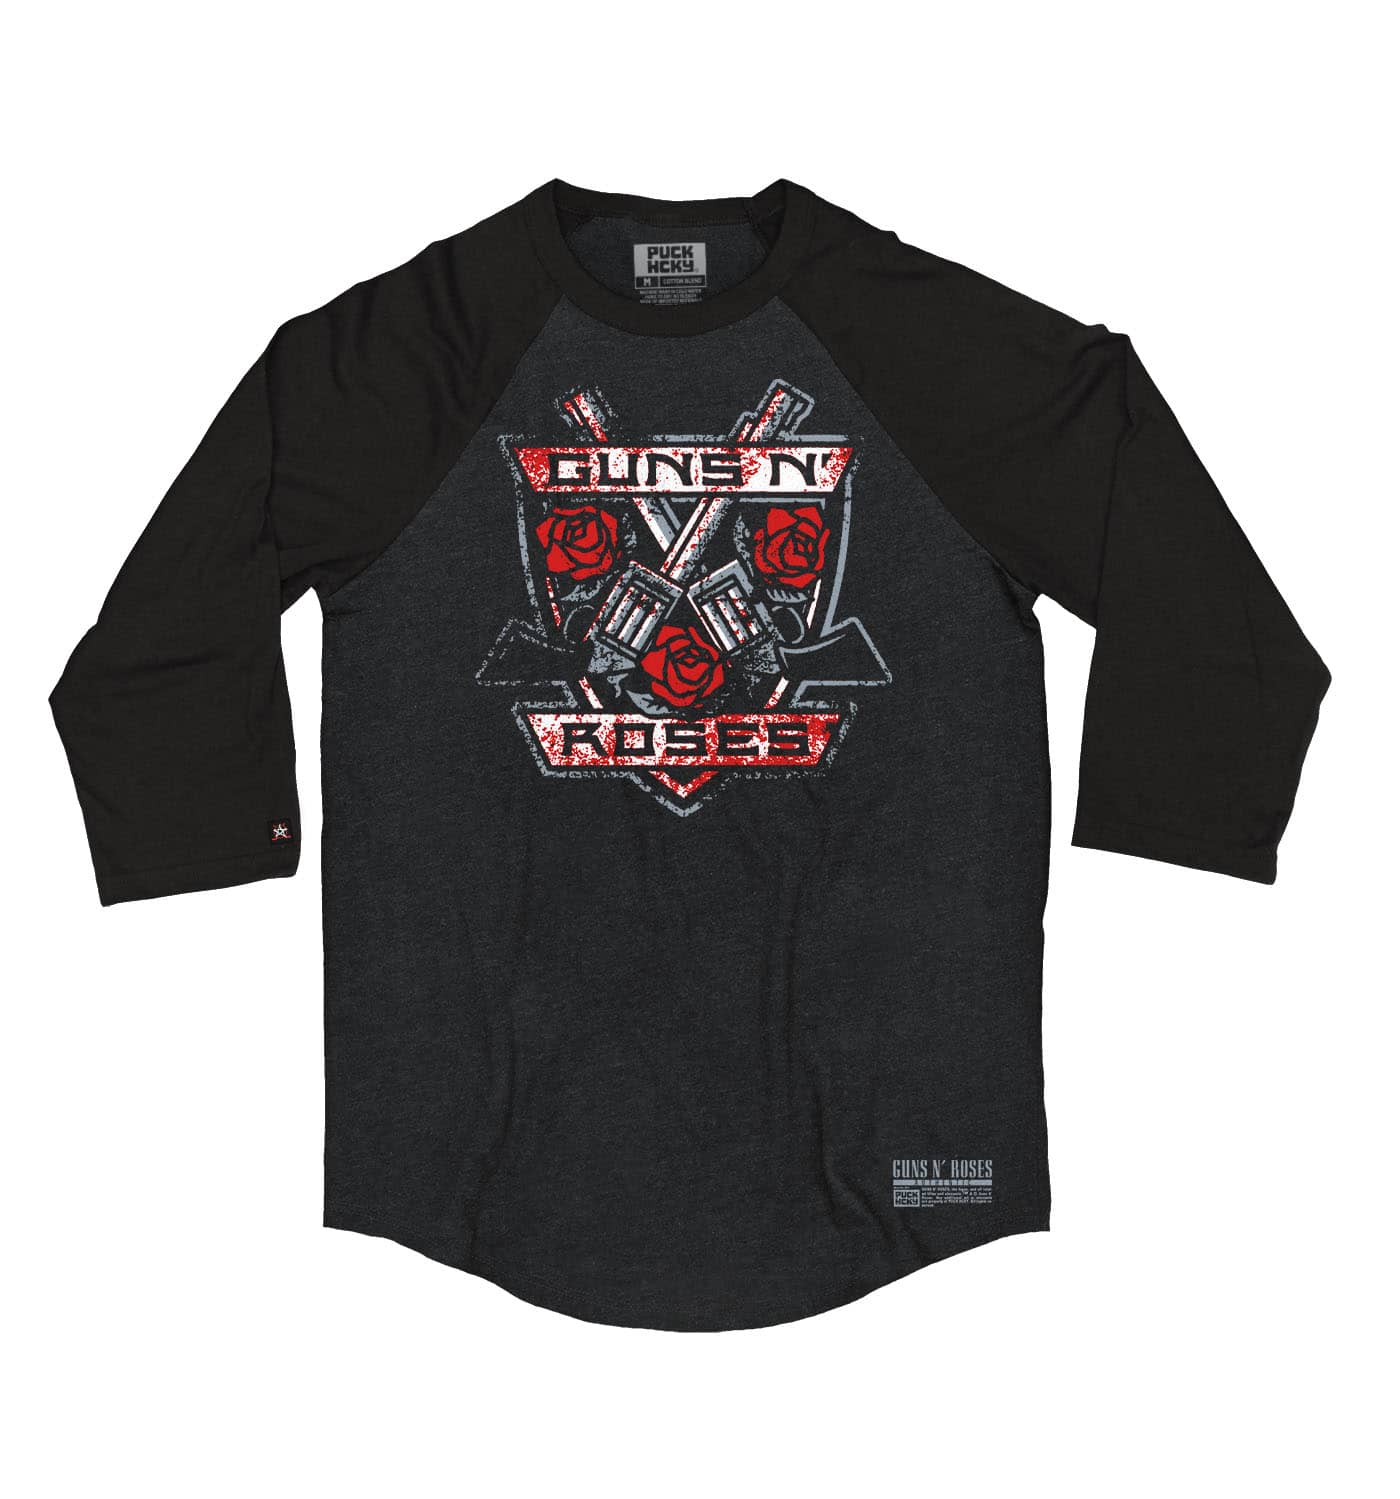 GUNS N' ROSES 'THE KINGS' hockey raglan t-shirt in graphite heather with black sleeves front view